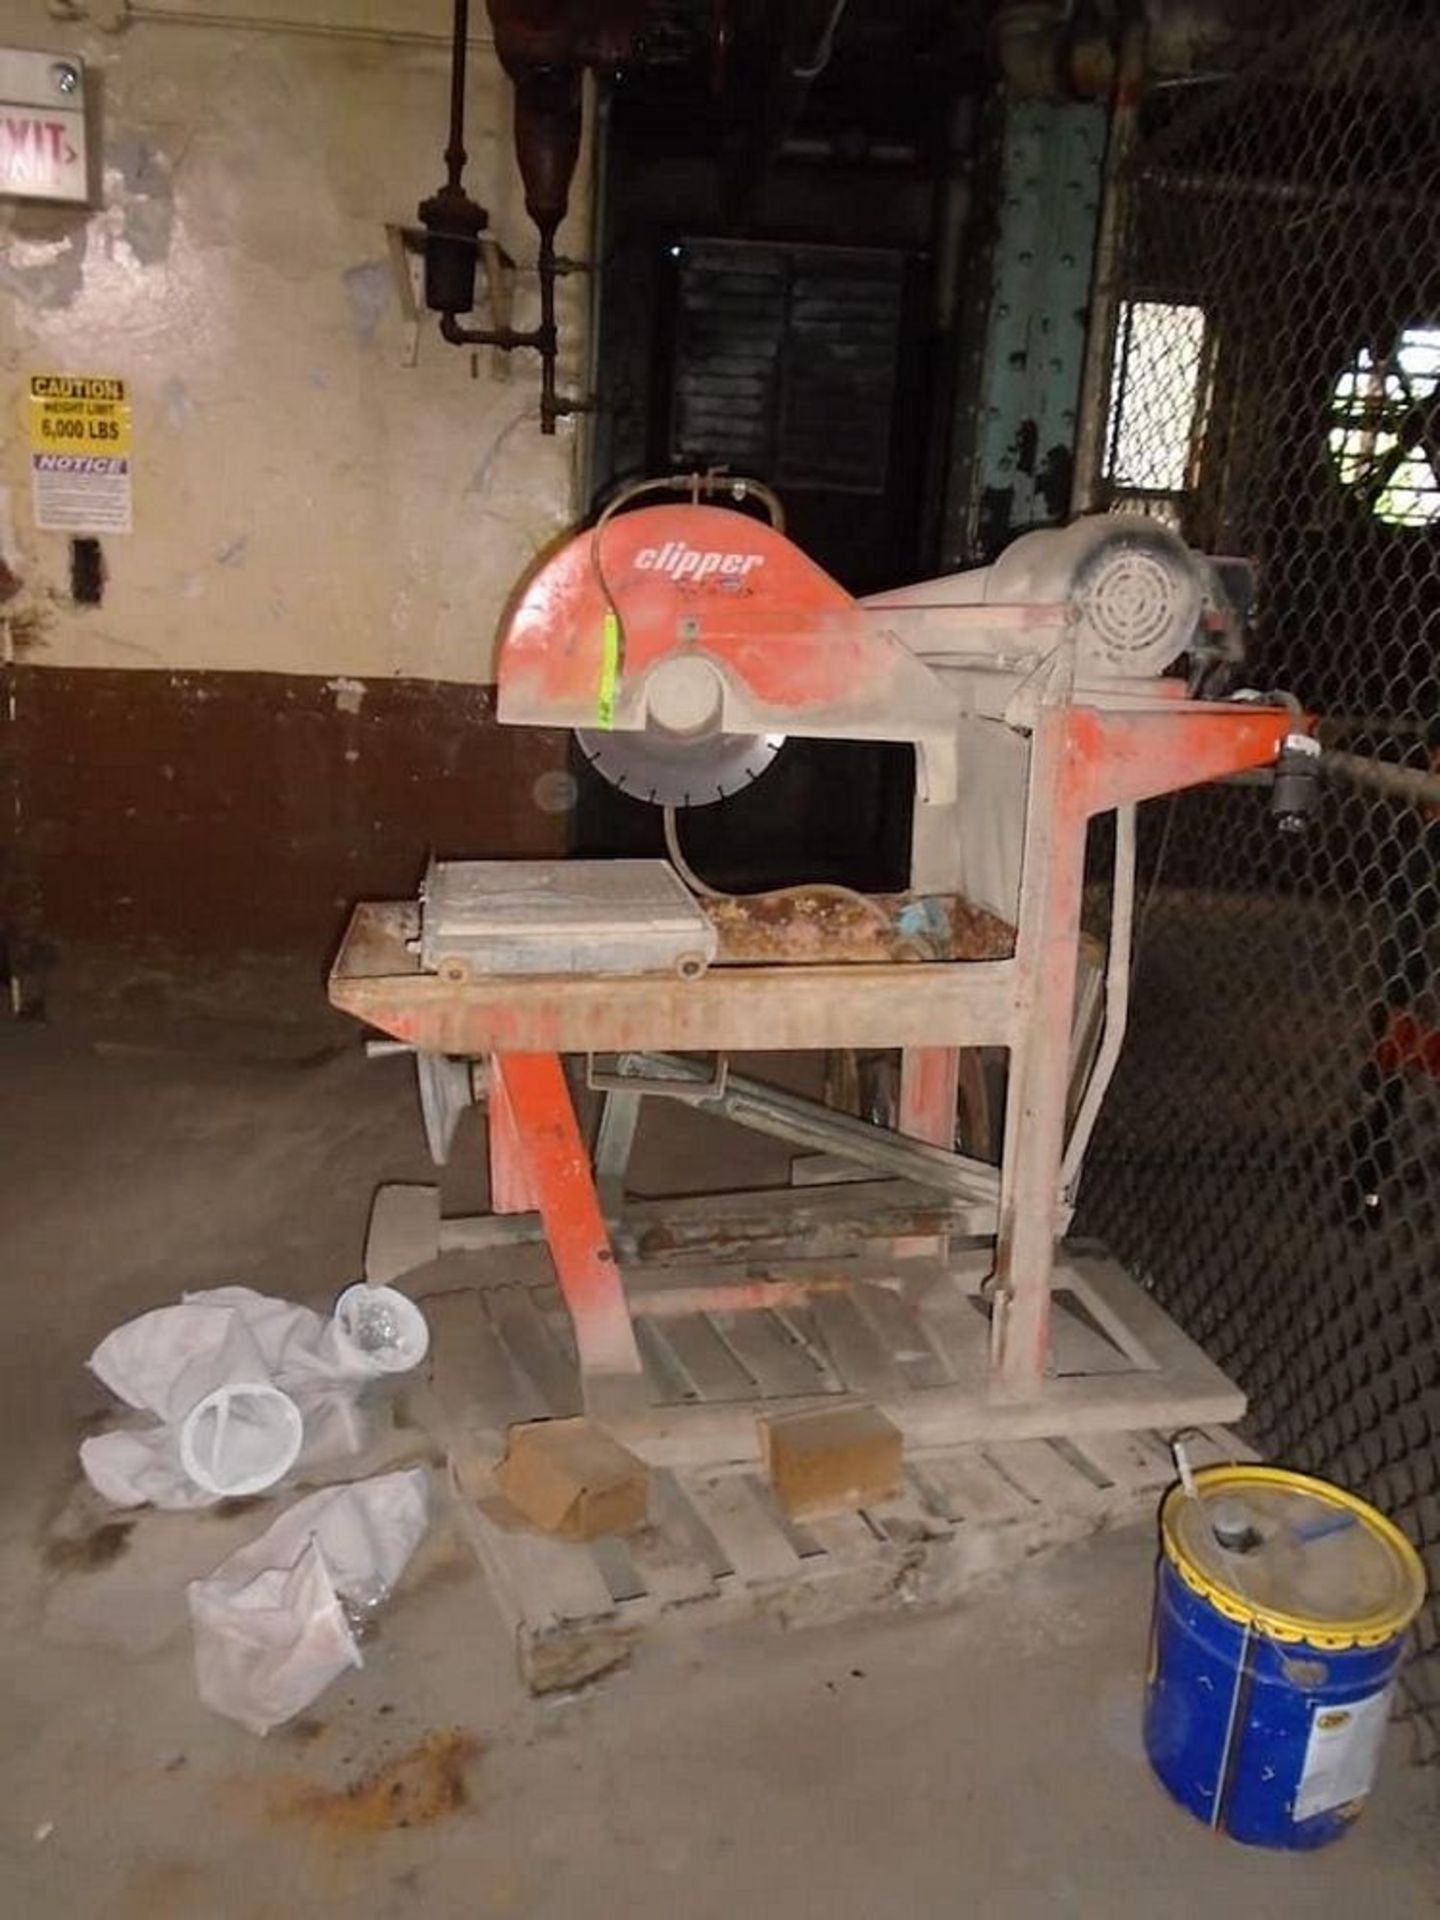 Clipper wet saw and stand